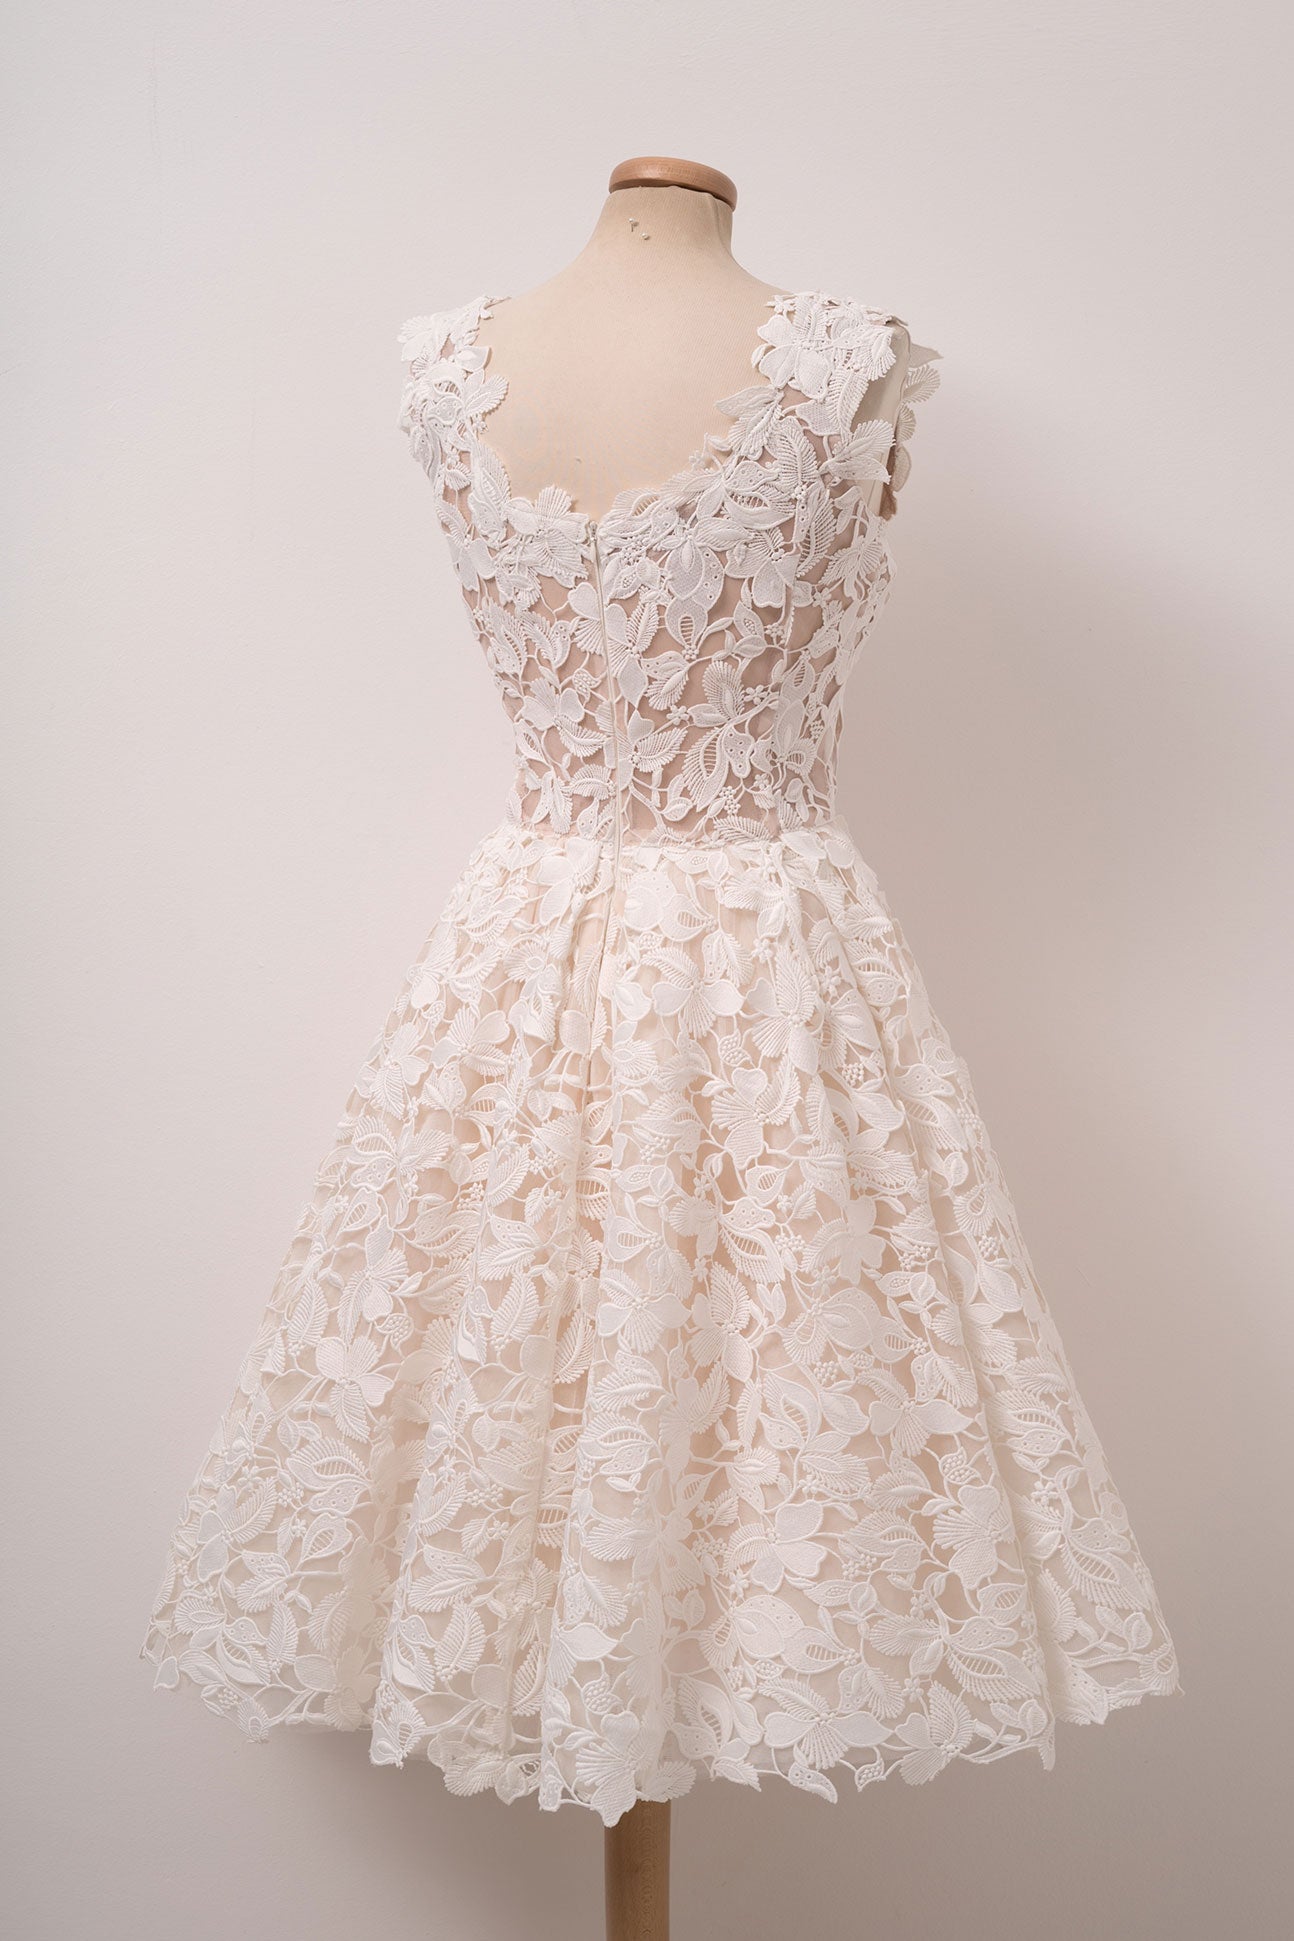 Ivory white lace short prom dress, cute lace homecoming dress